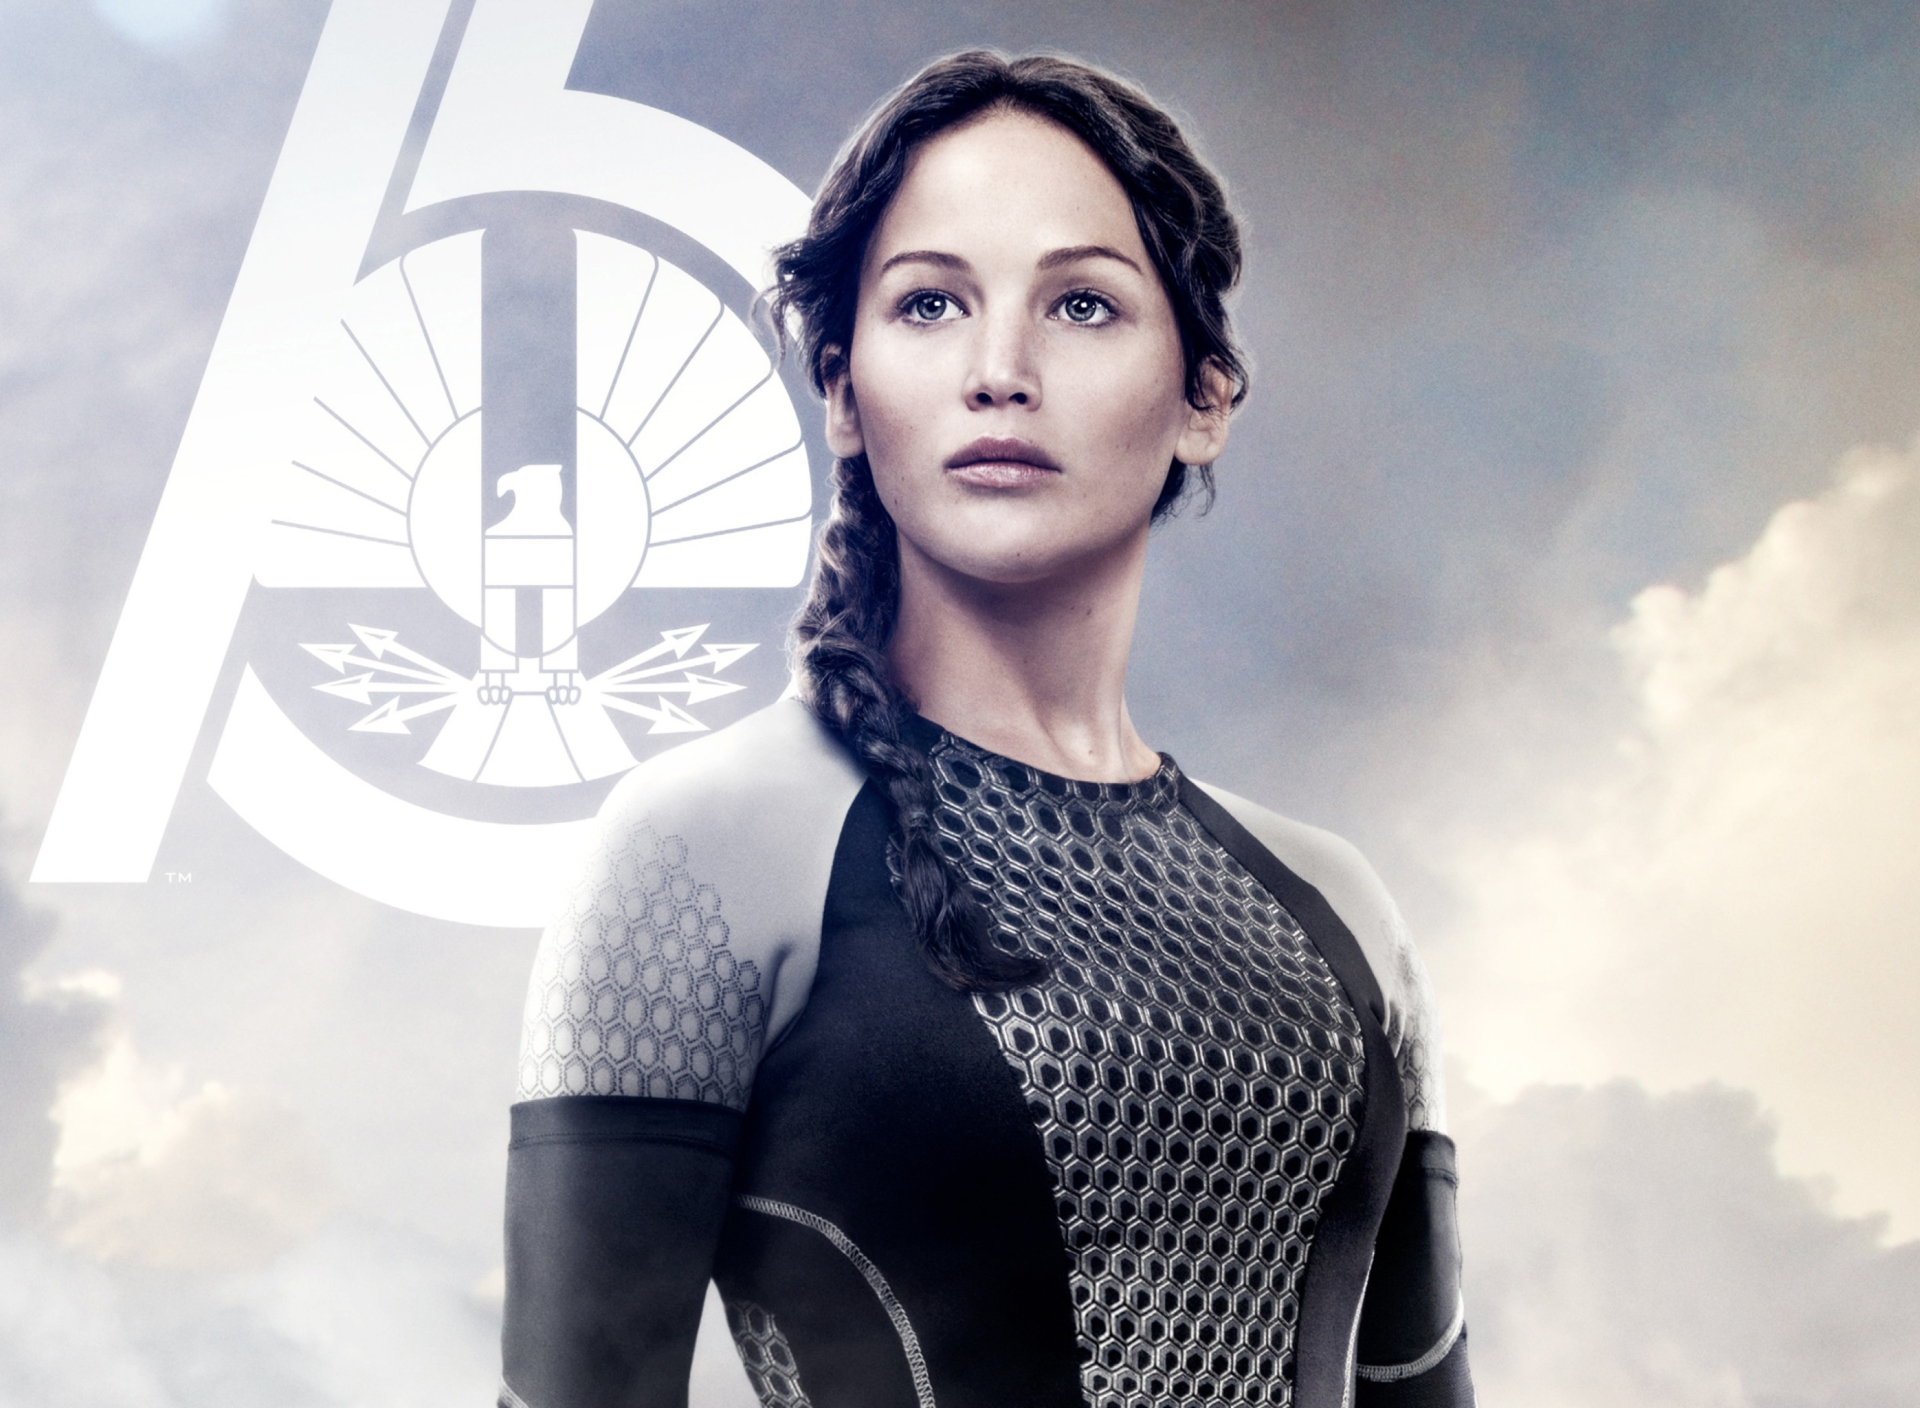 Jennifer Lawrence In The Hunger Games Catching Fire screenshot #1 1920x1408